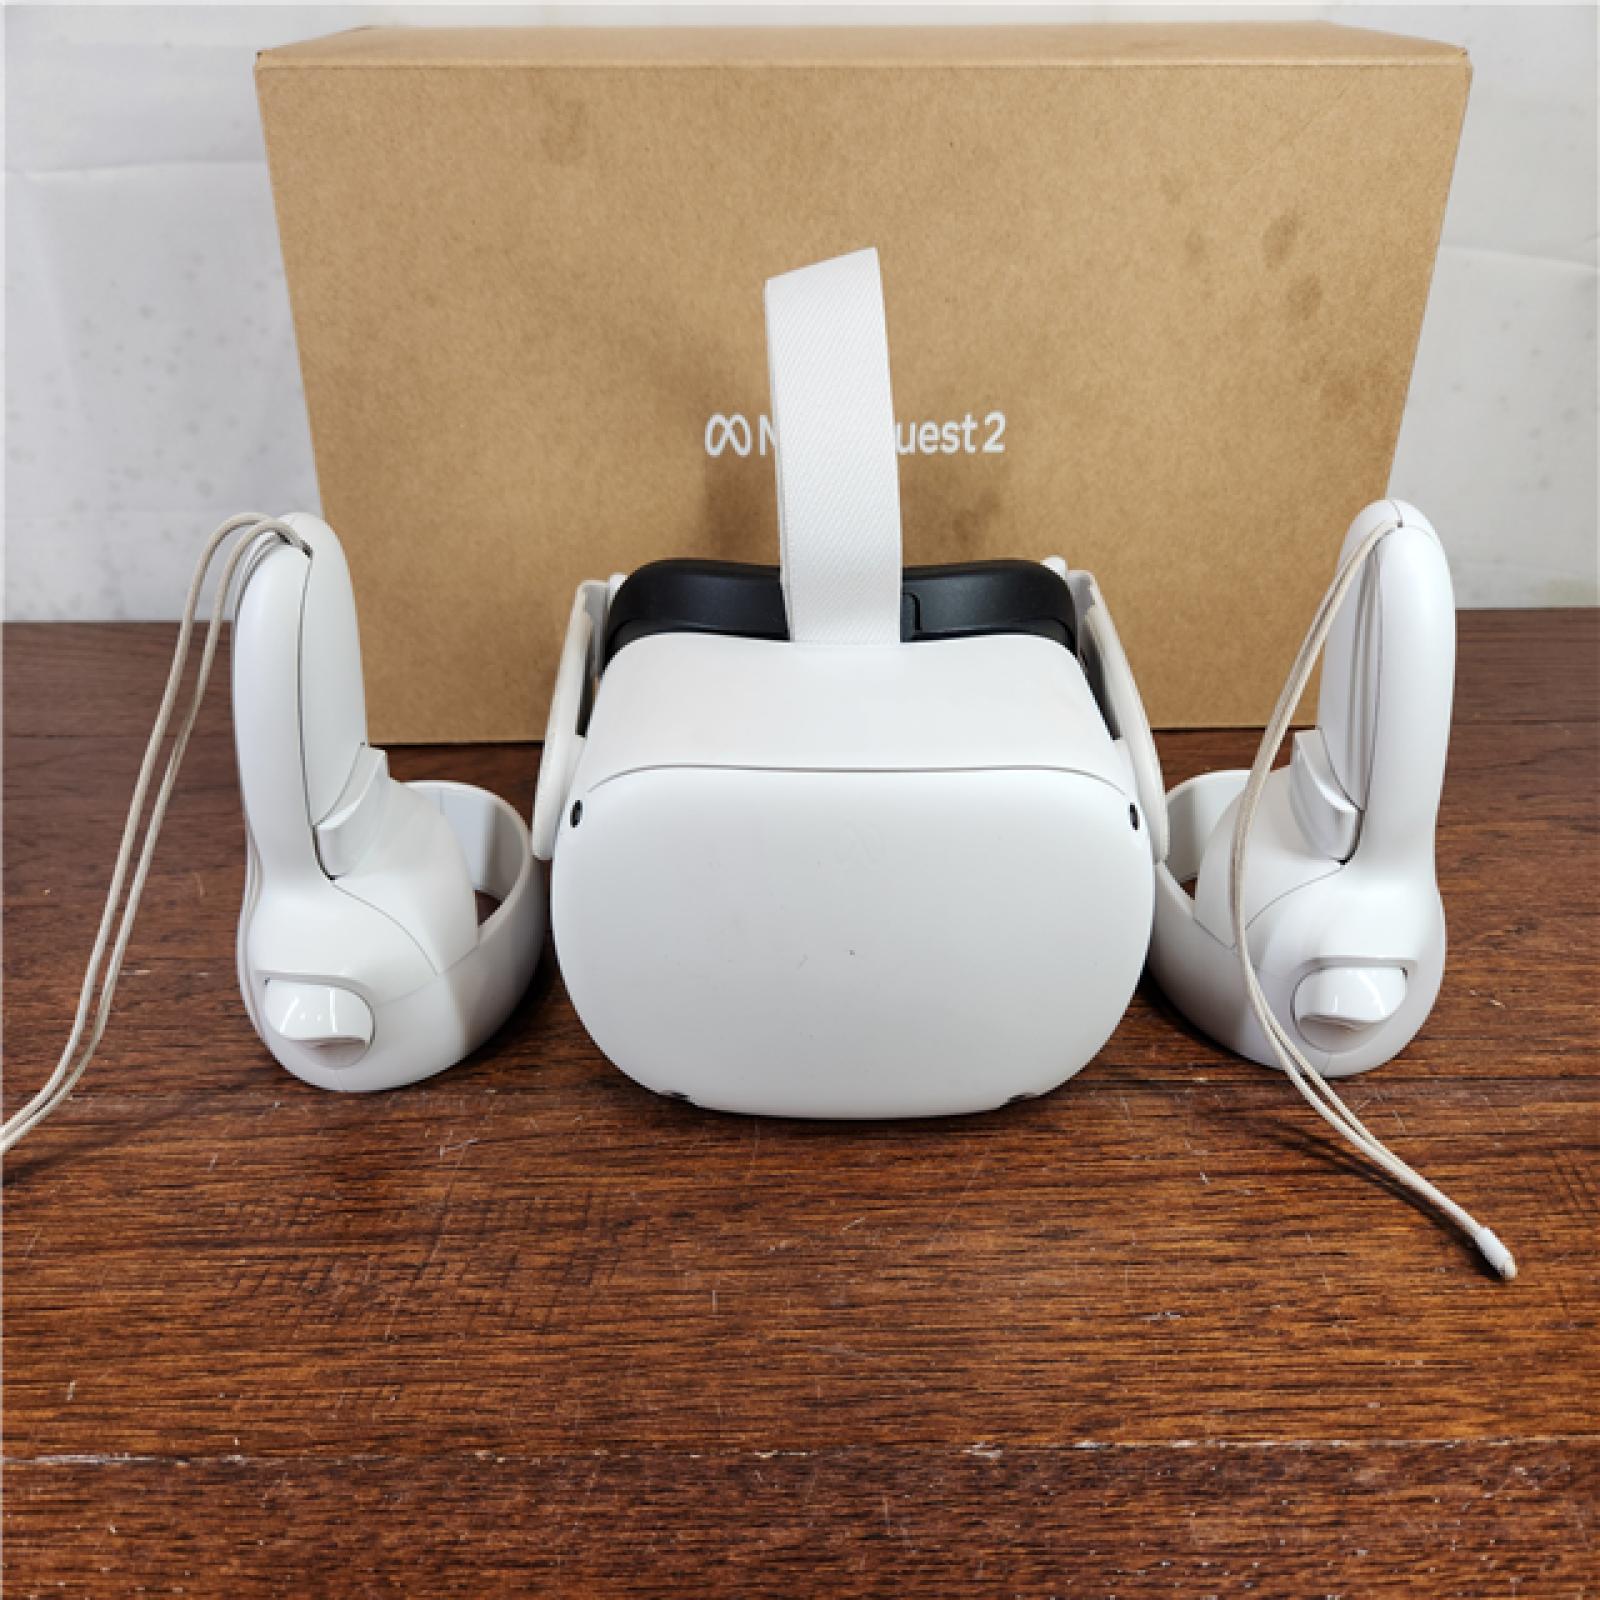 AS-IS Meta Quest 2 Advanced All-in-One Virtual Reality Headset - 128GB (KW49CM)